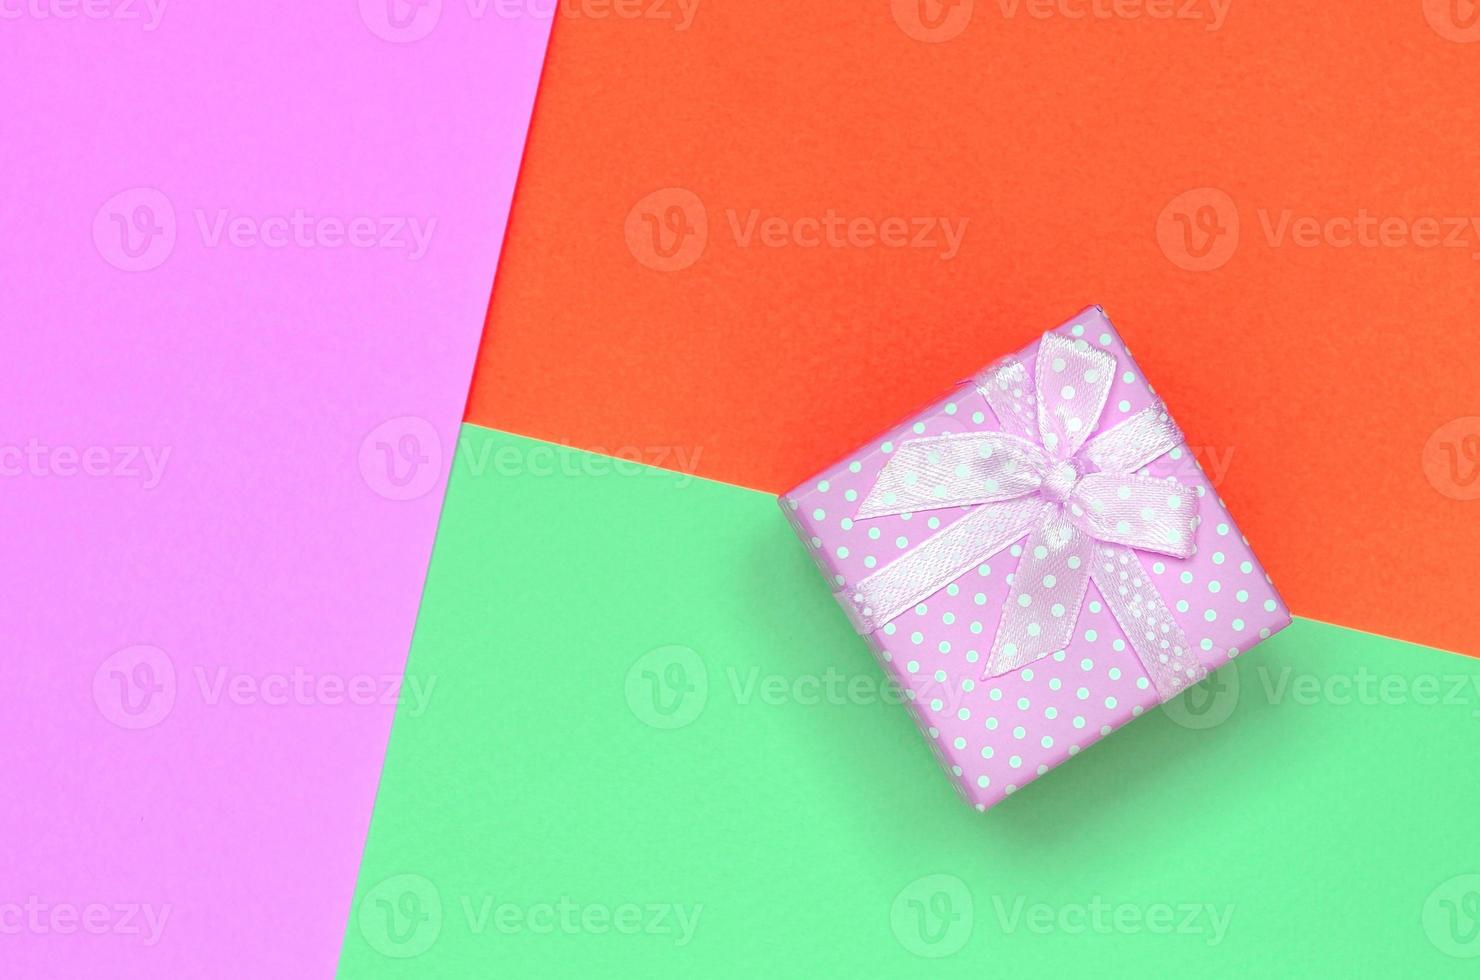 Small pink gift box lie on texture background of fashion pastel turquoise, red and pink colors paper photo